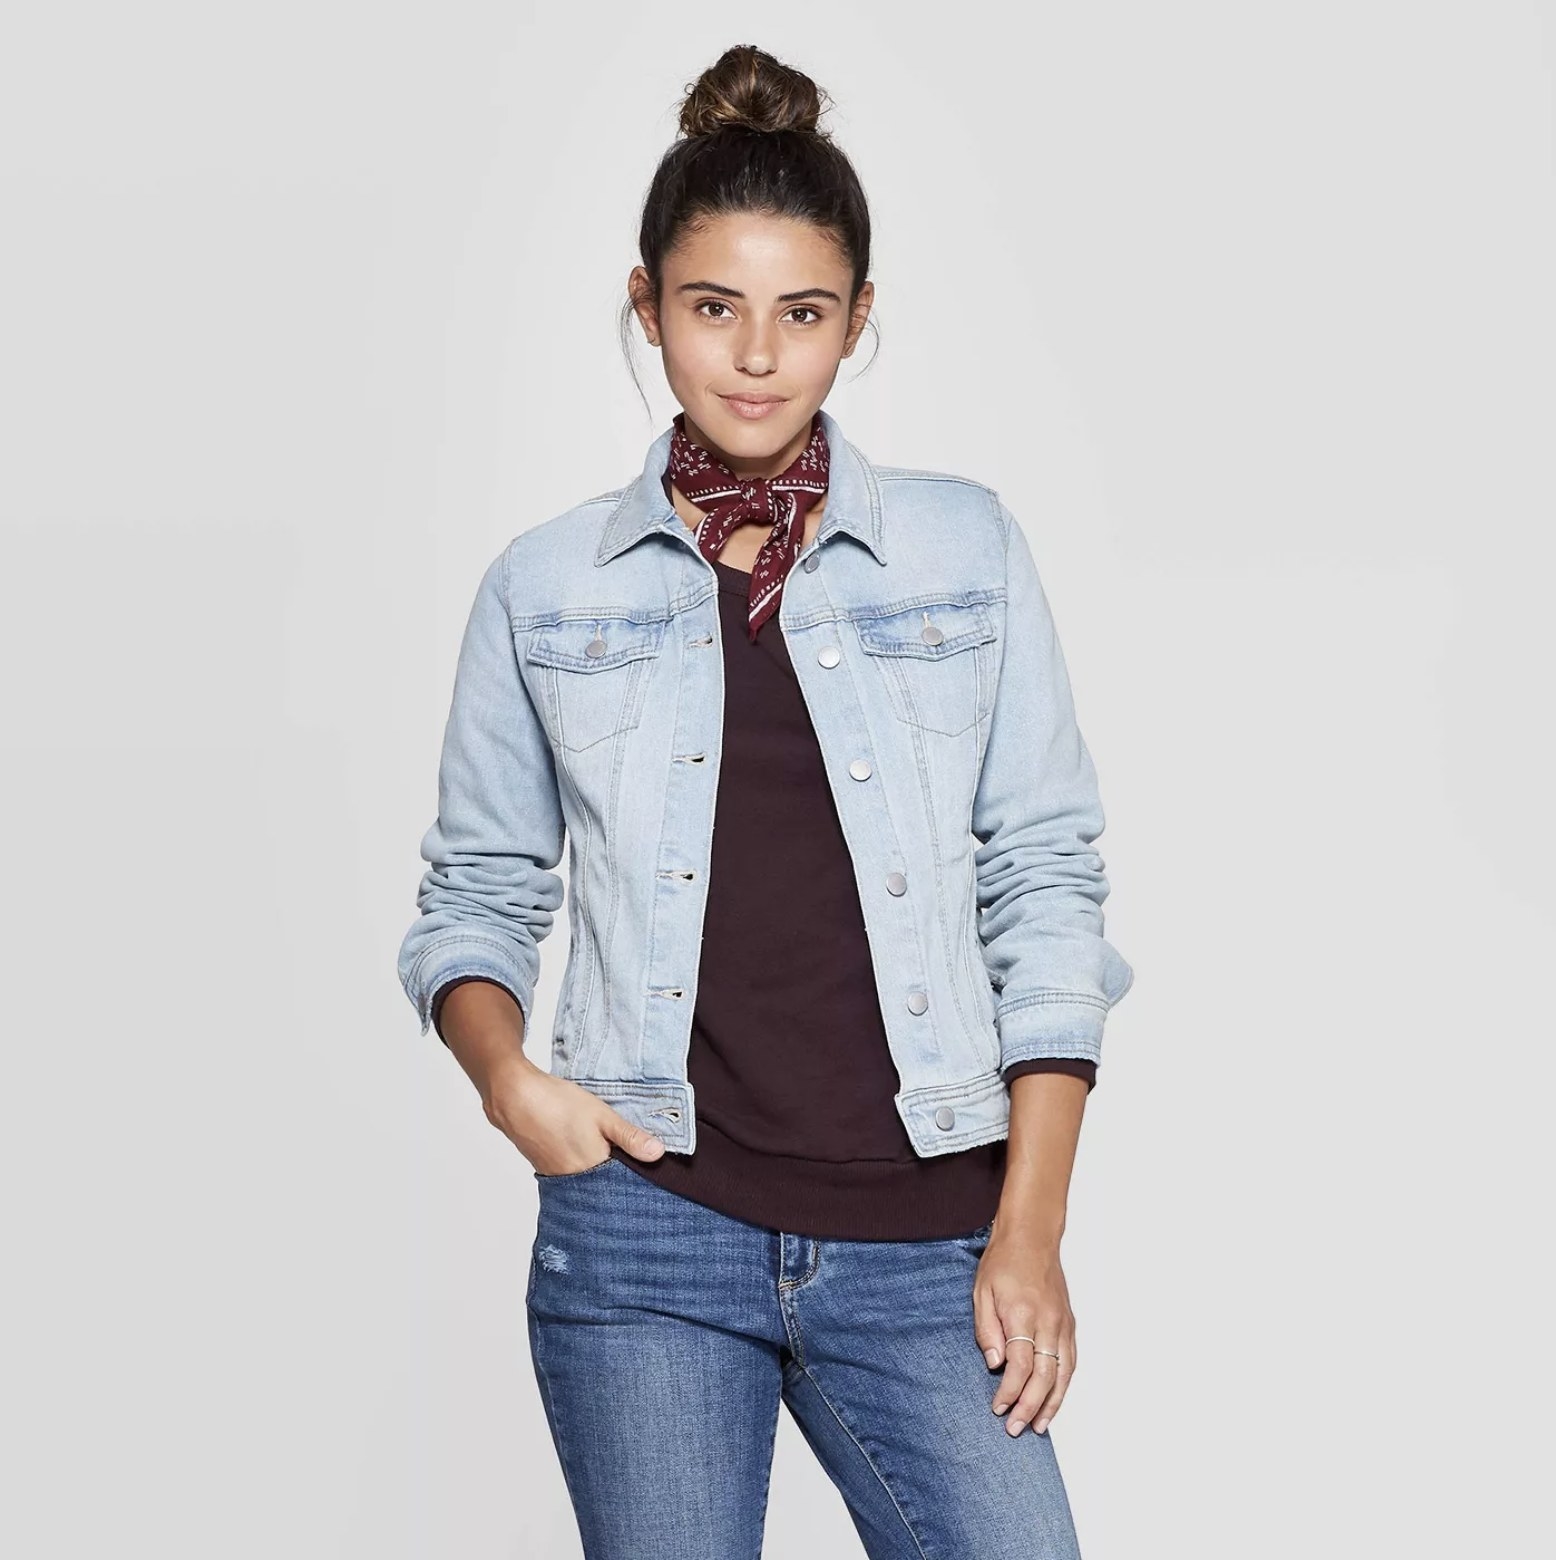 Model wears light blue denim jacket with maroon top and medium blue jeans